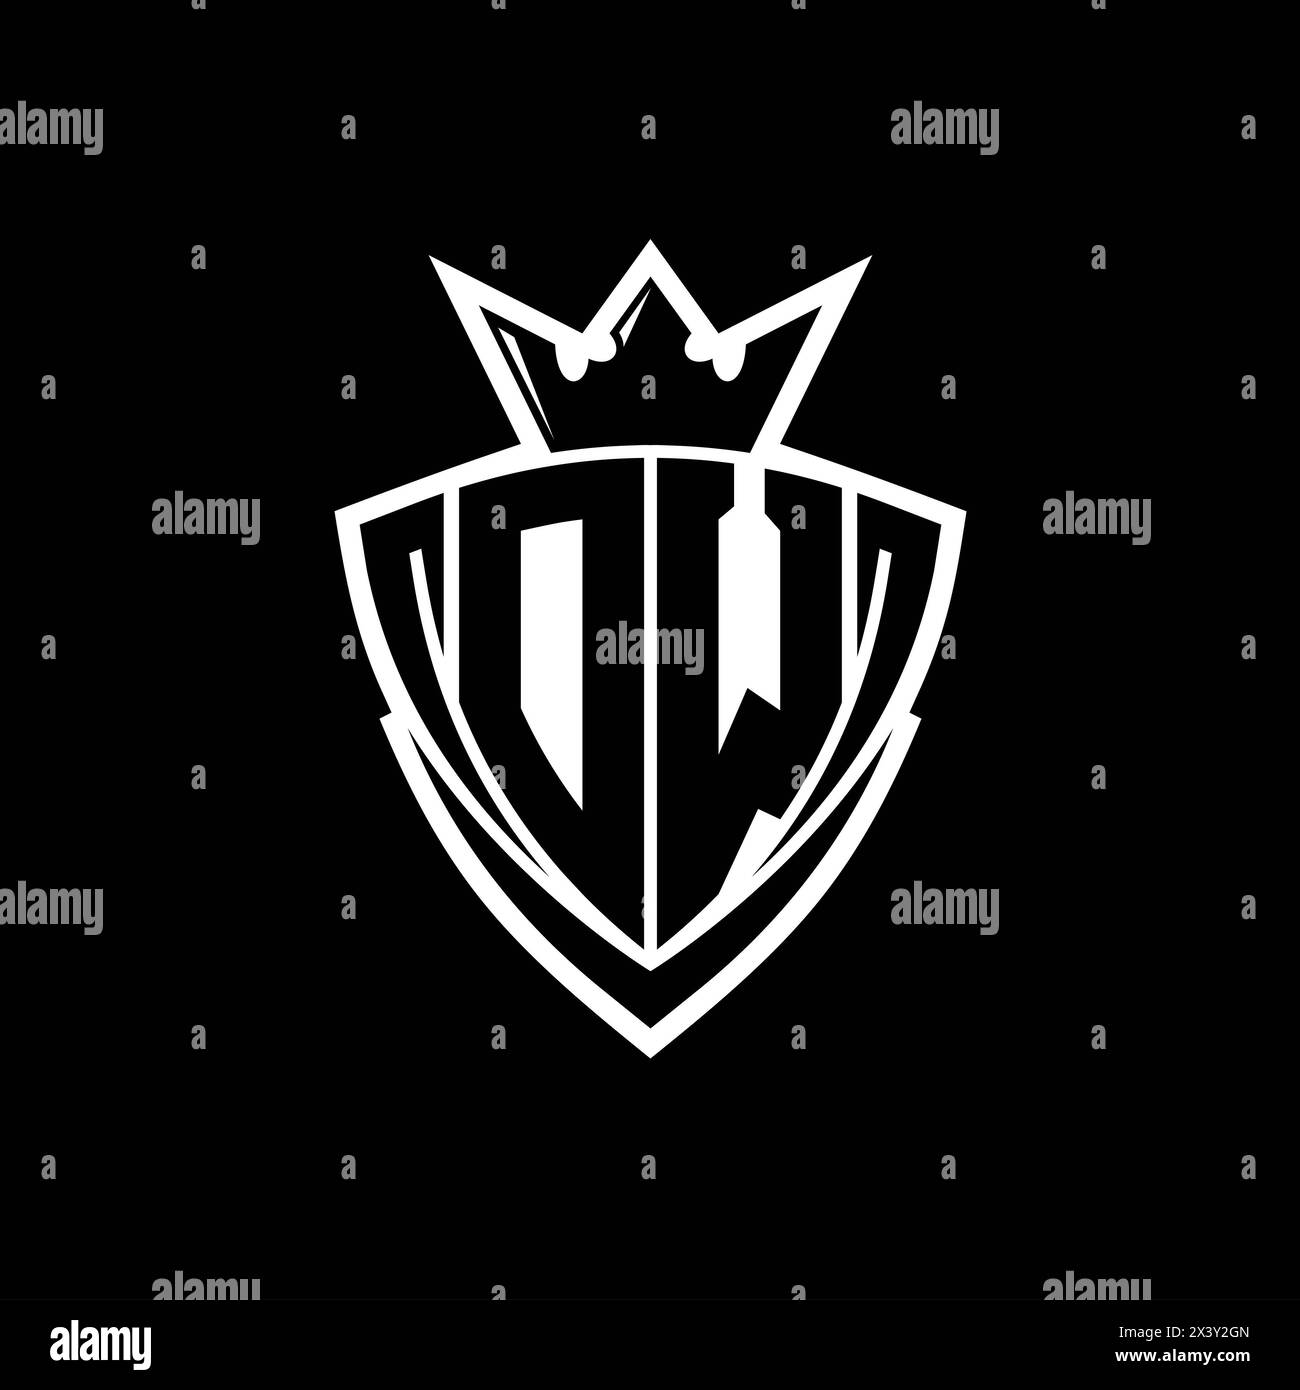 DW Bold letter logo with sharp triangle shield shape with crown inside white outline on black background template design Stock Photo